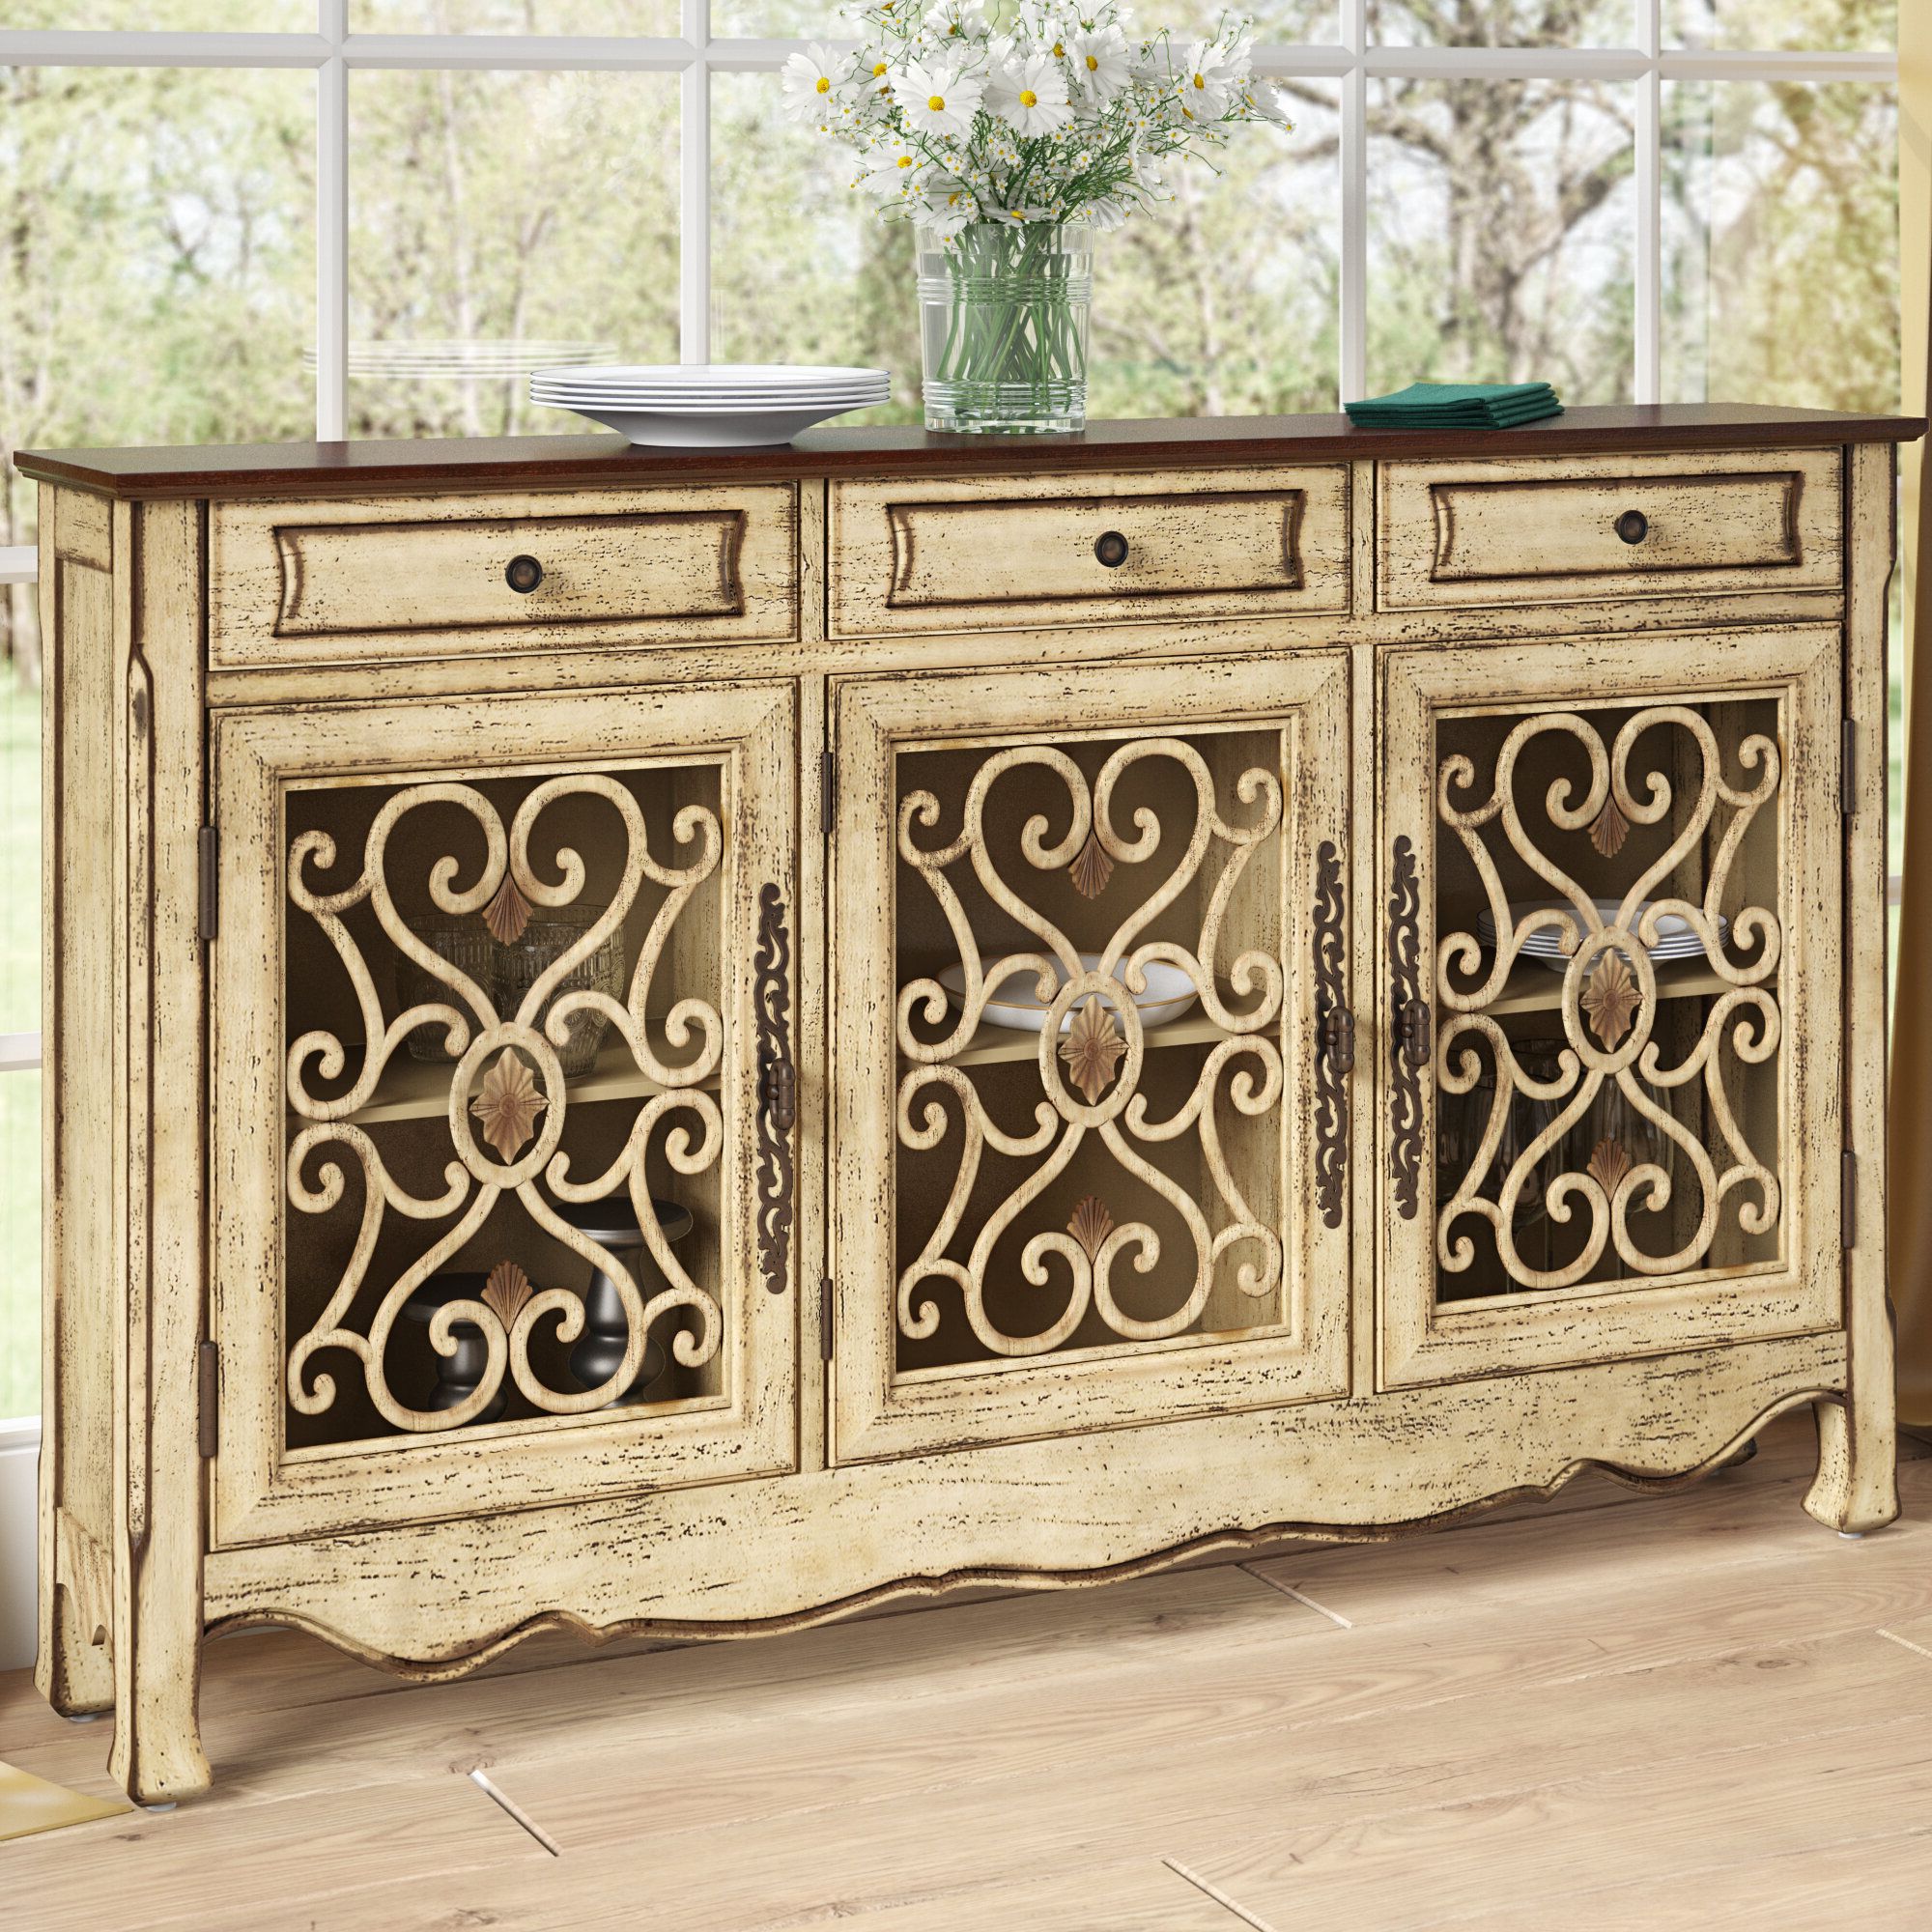 Cream Credenza | Wayfair Inside Pale Pink Agate Wood Credenzas (View 10 of 20)